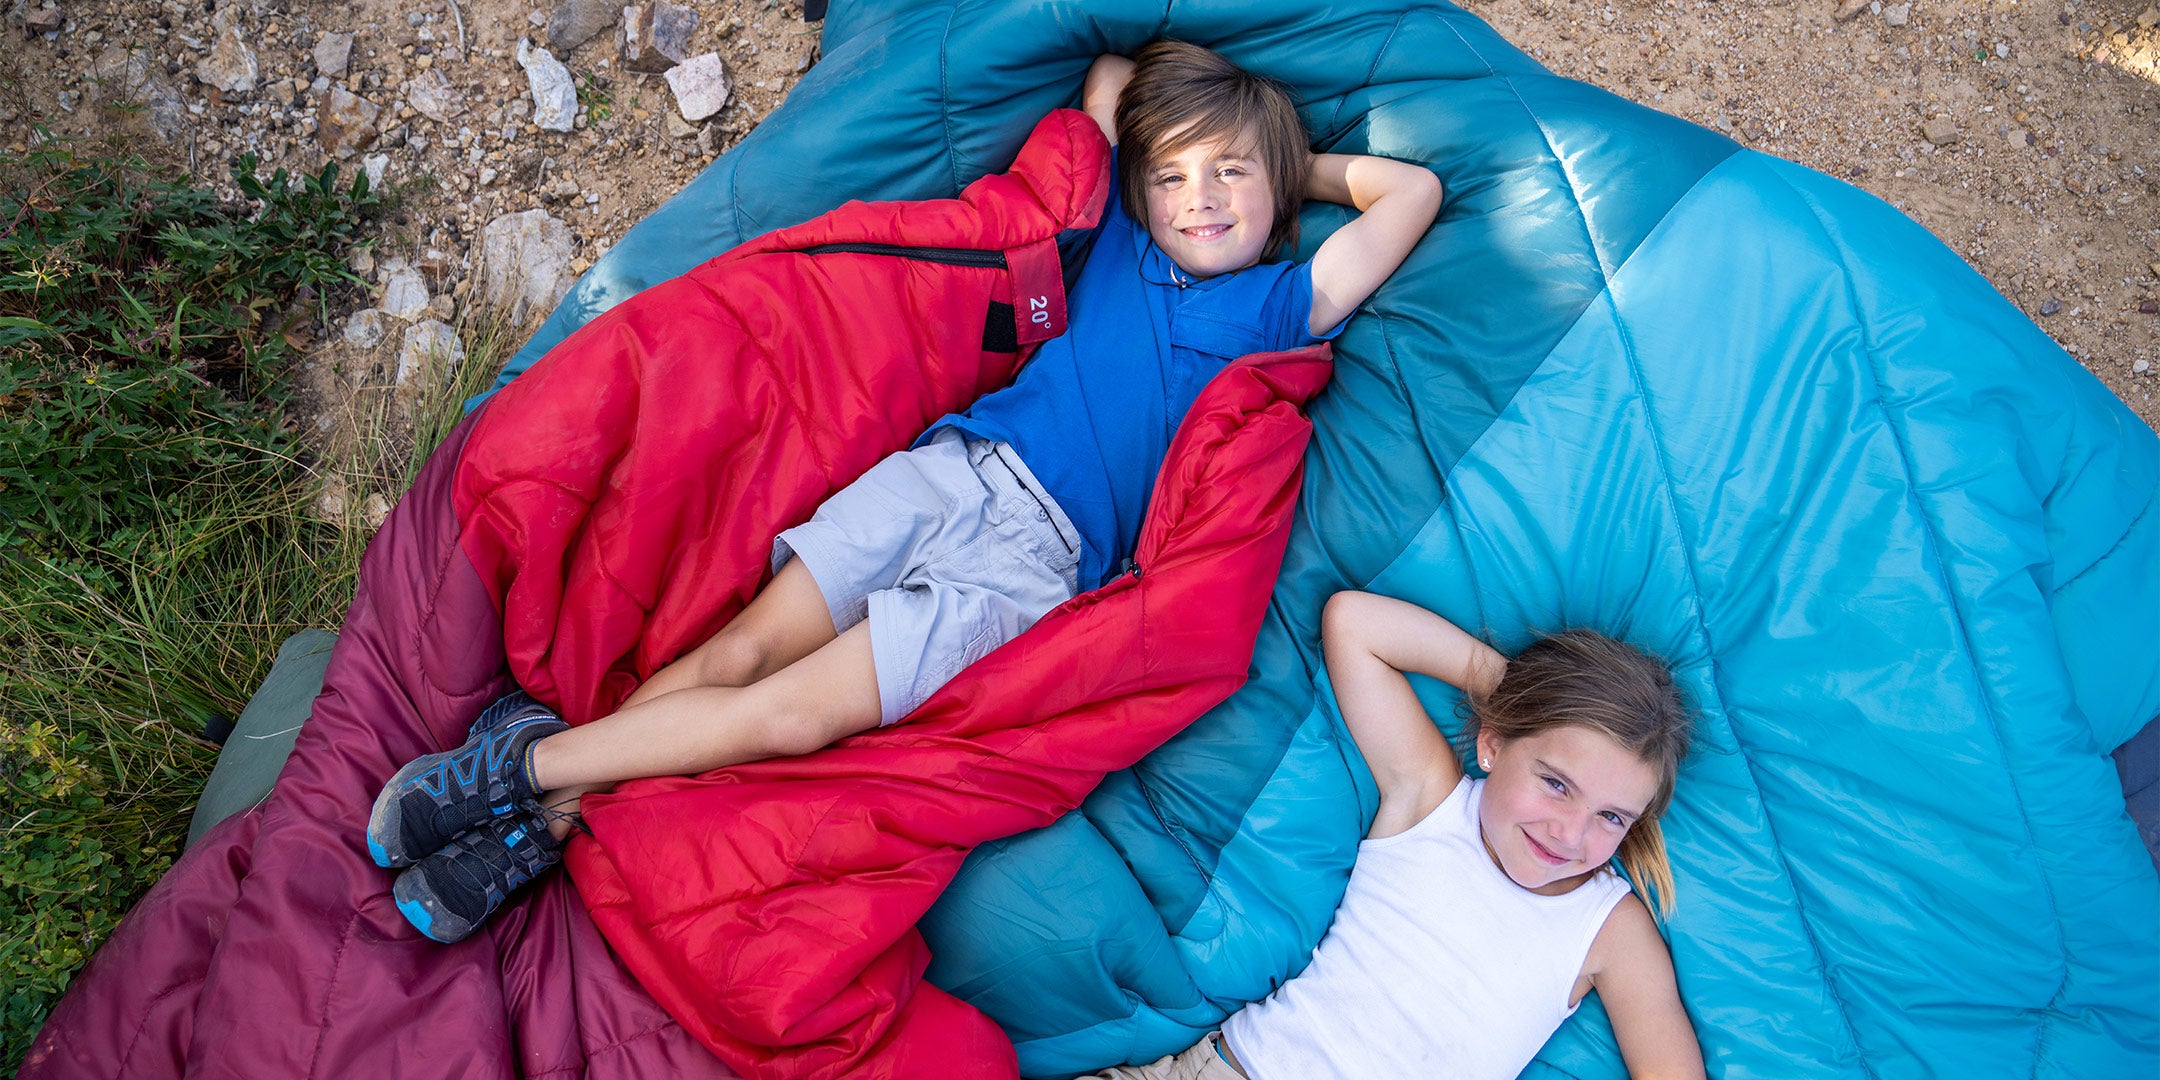 Two children smile up at the camera as they lie together on two brightly colored sleeping bags.